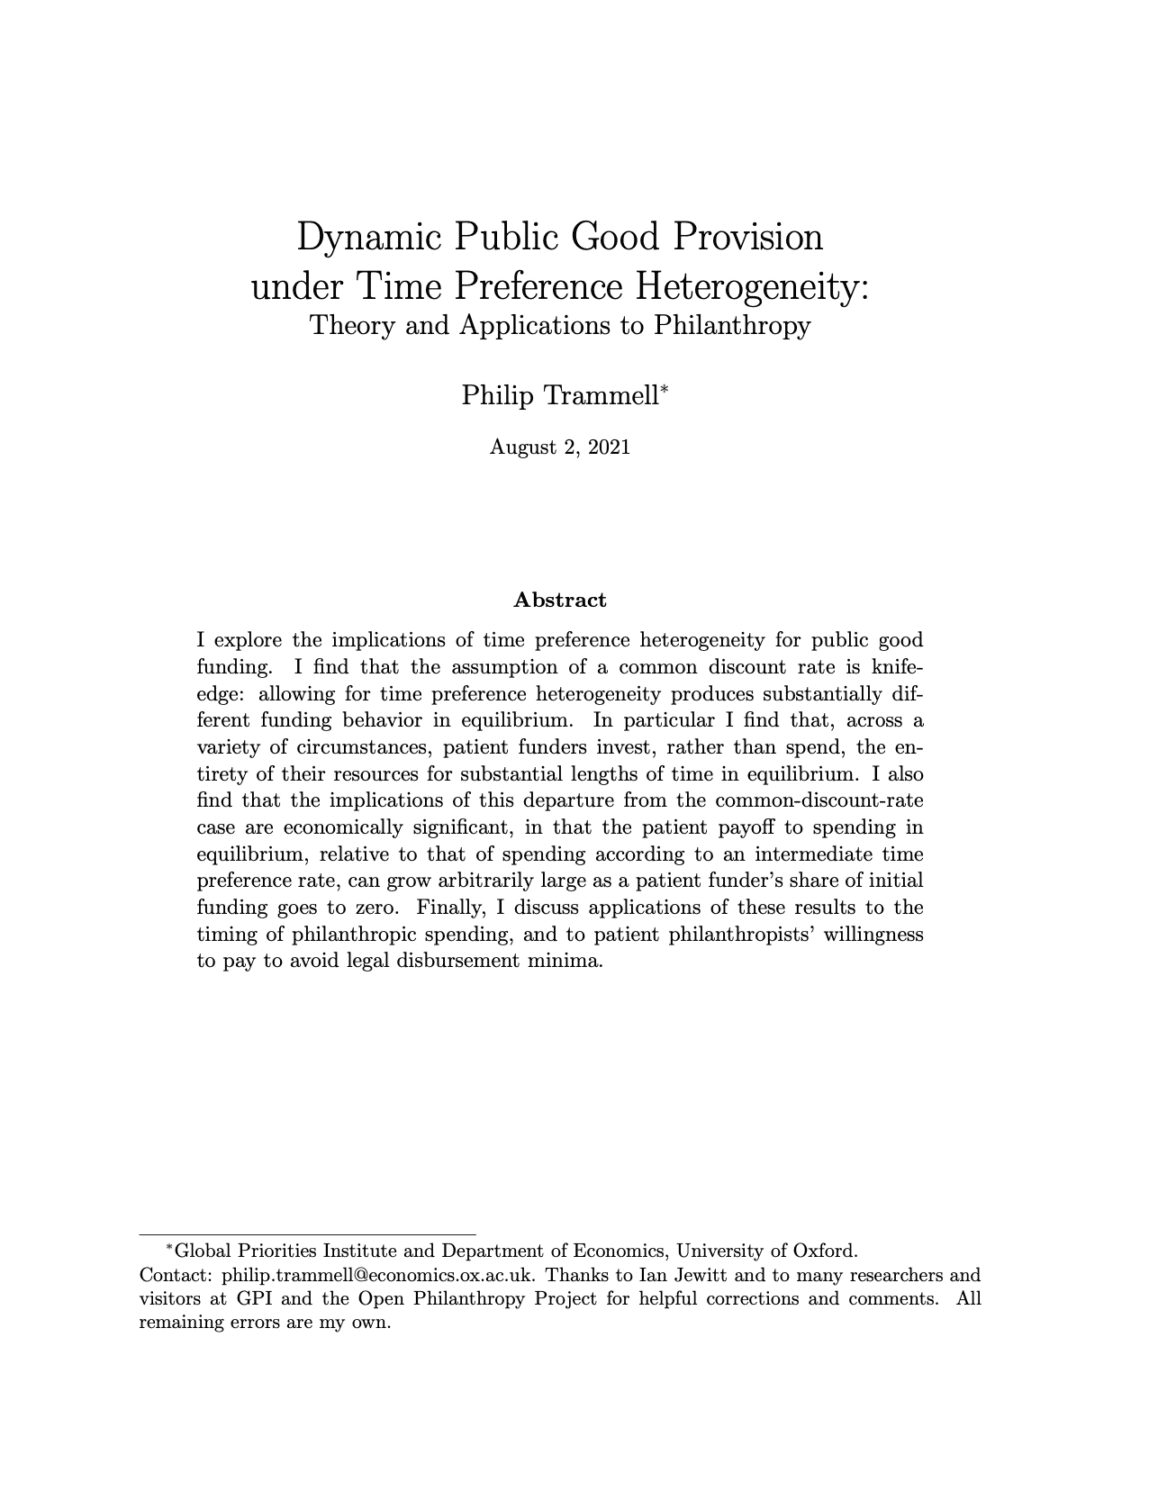 Trammell - Dynamic Public Good Provision under Time Preference Heterogeneity Cover